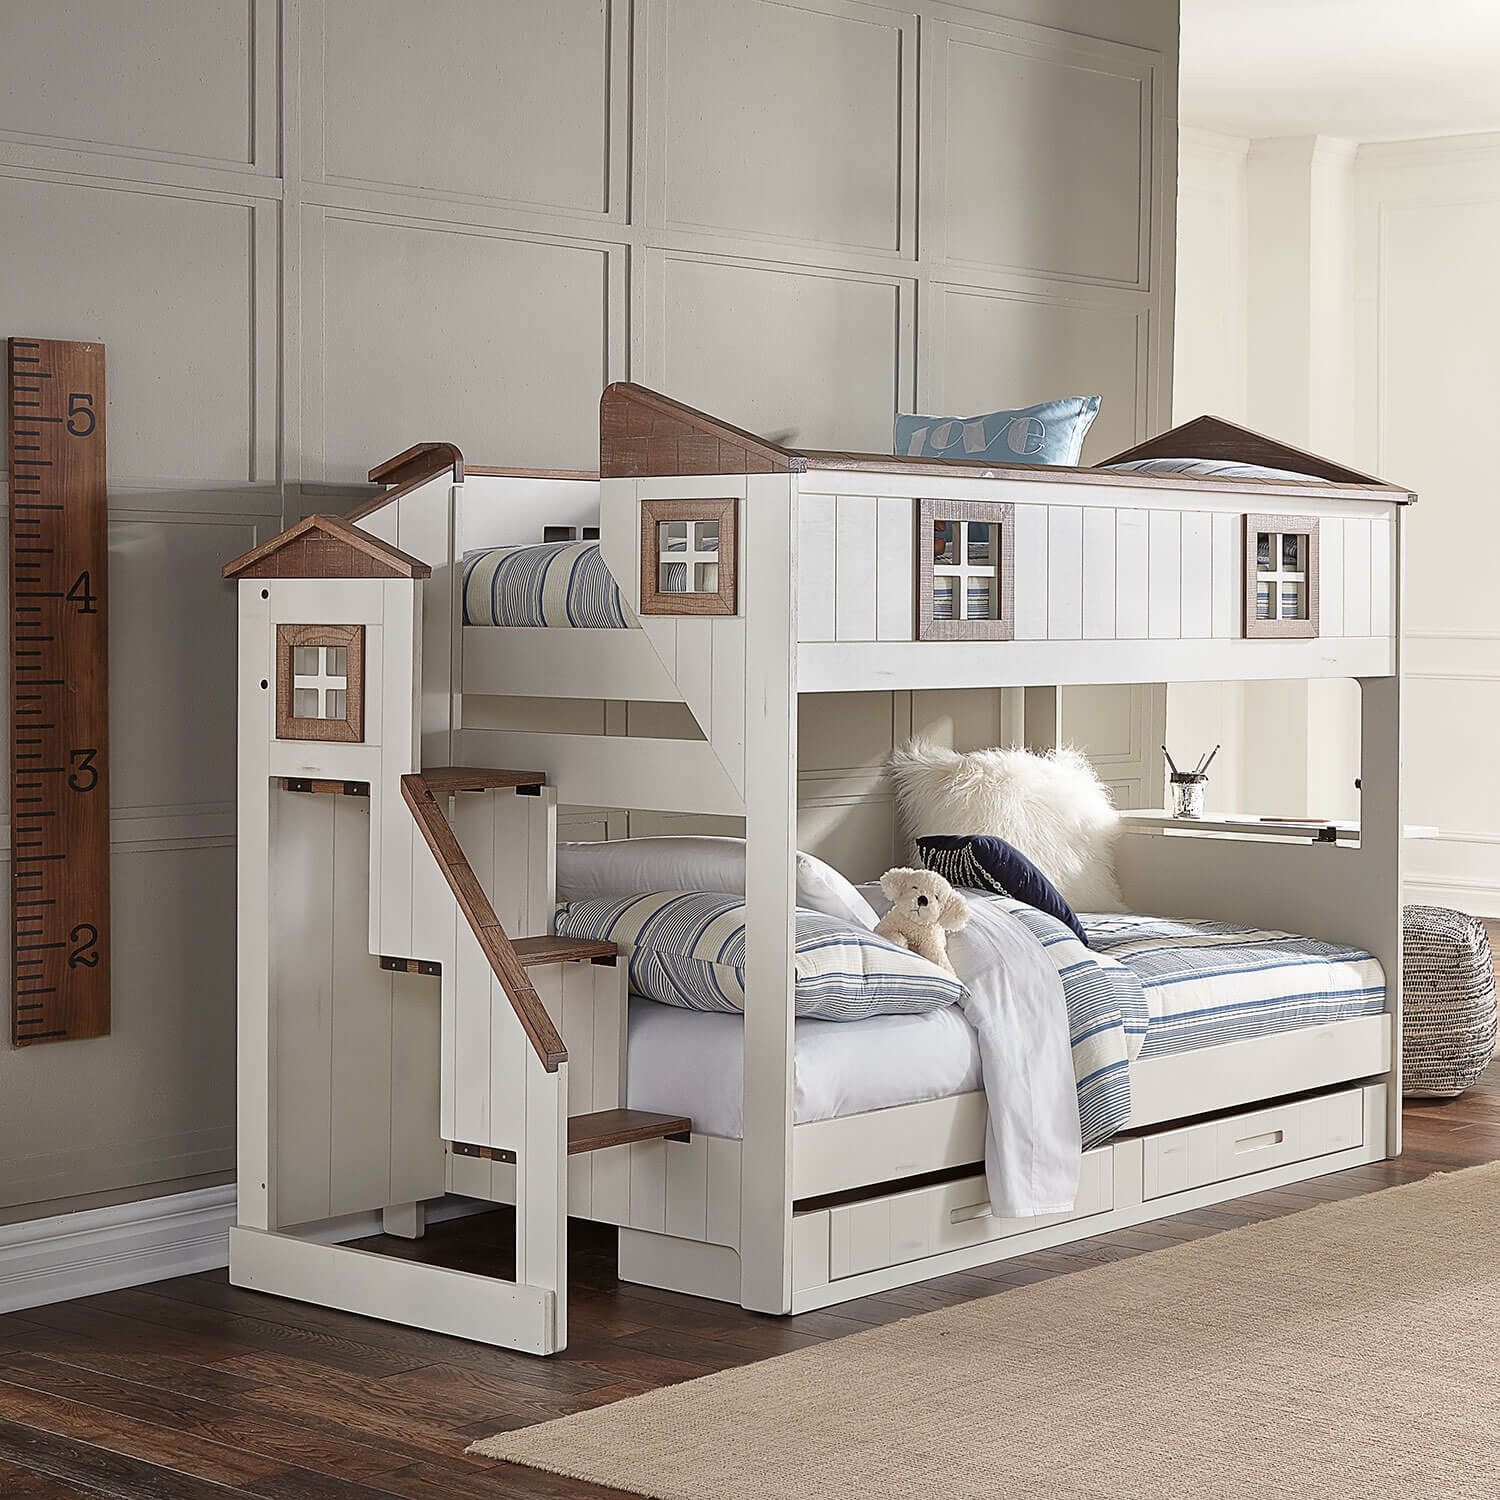 Bed Above Sofa, Twin Bunk Beds With Storage